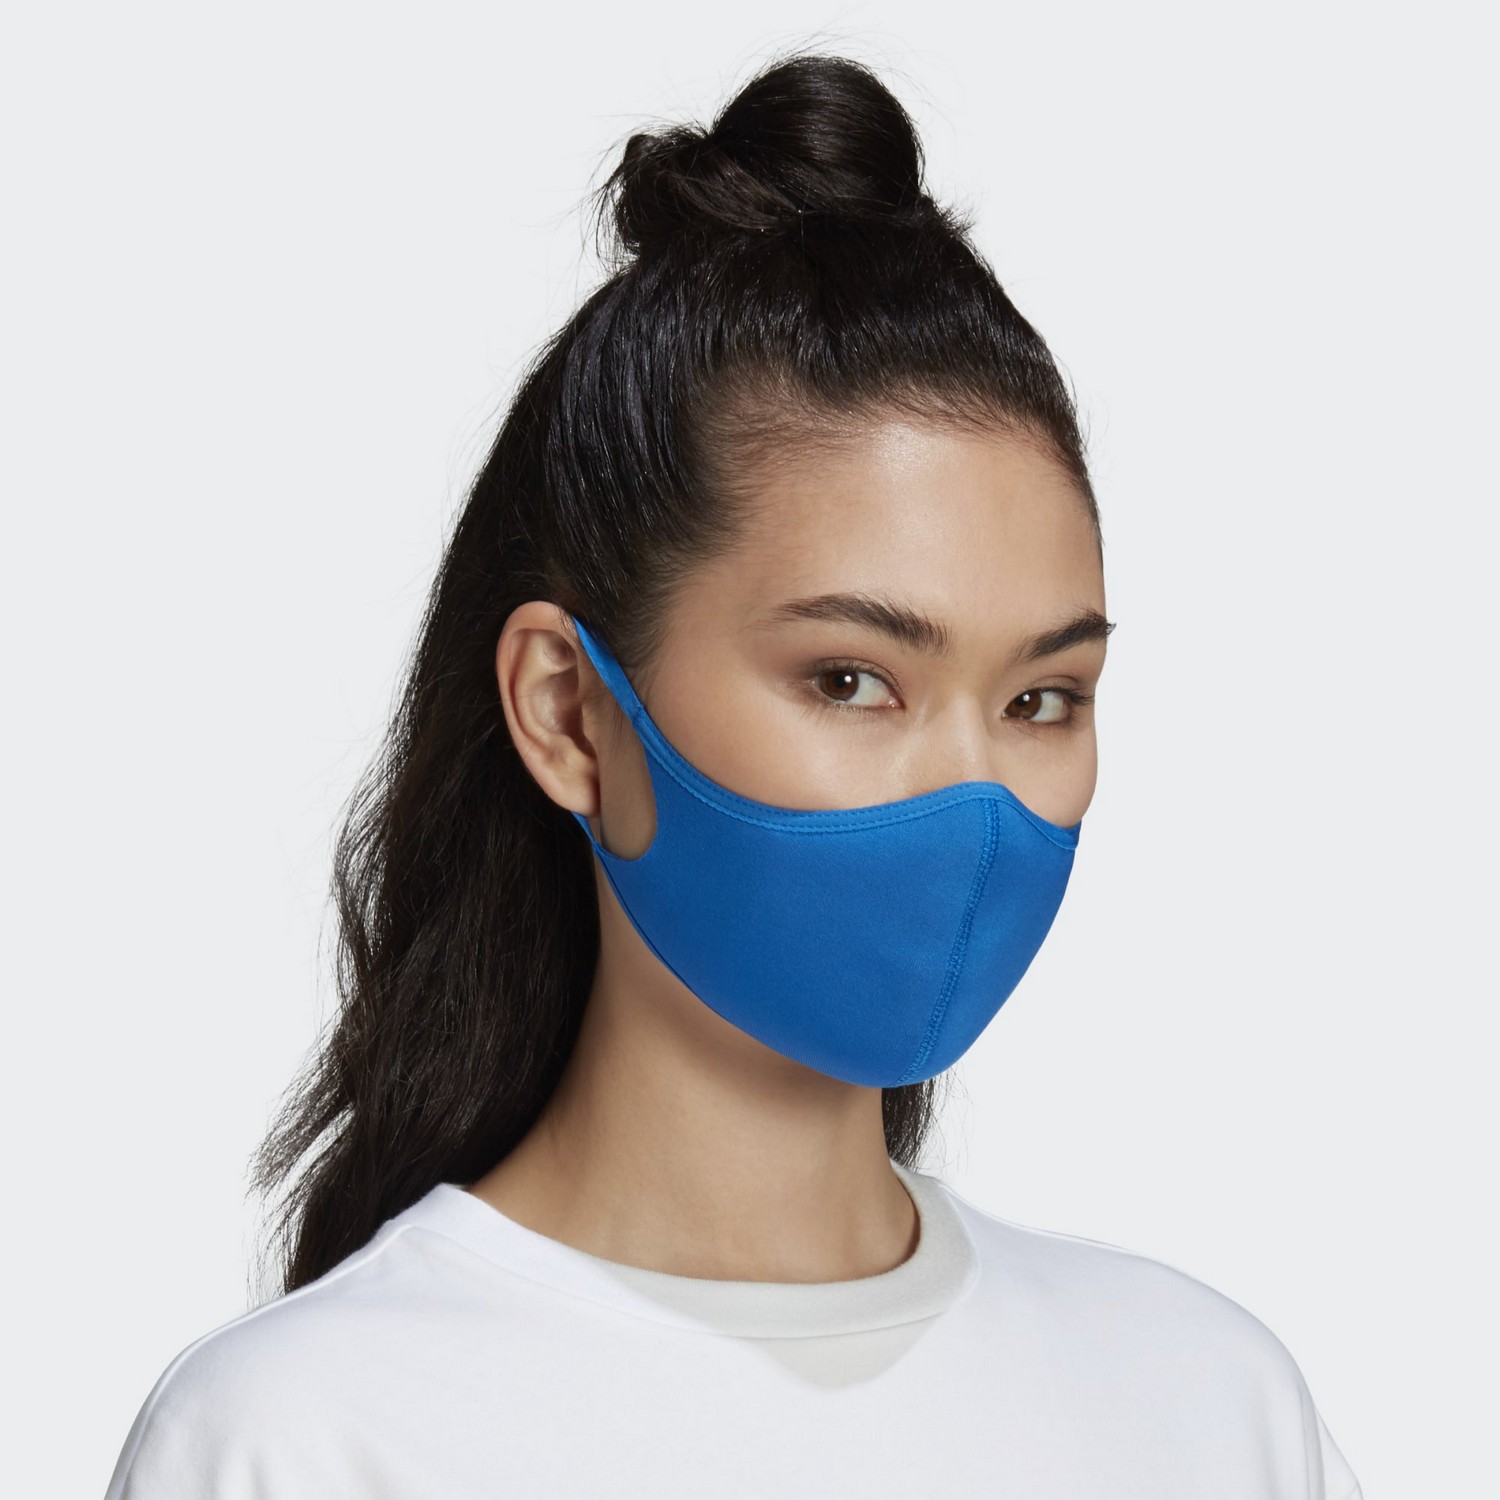 adidas-face-mask-launch-date -june-15-2020